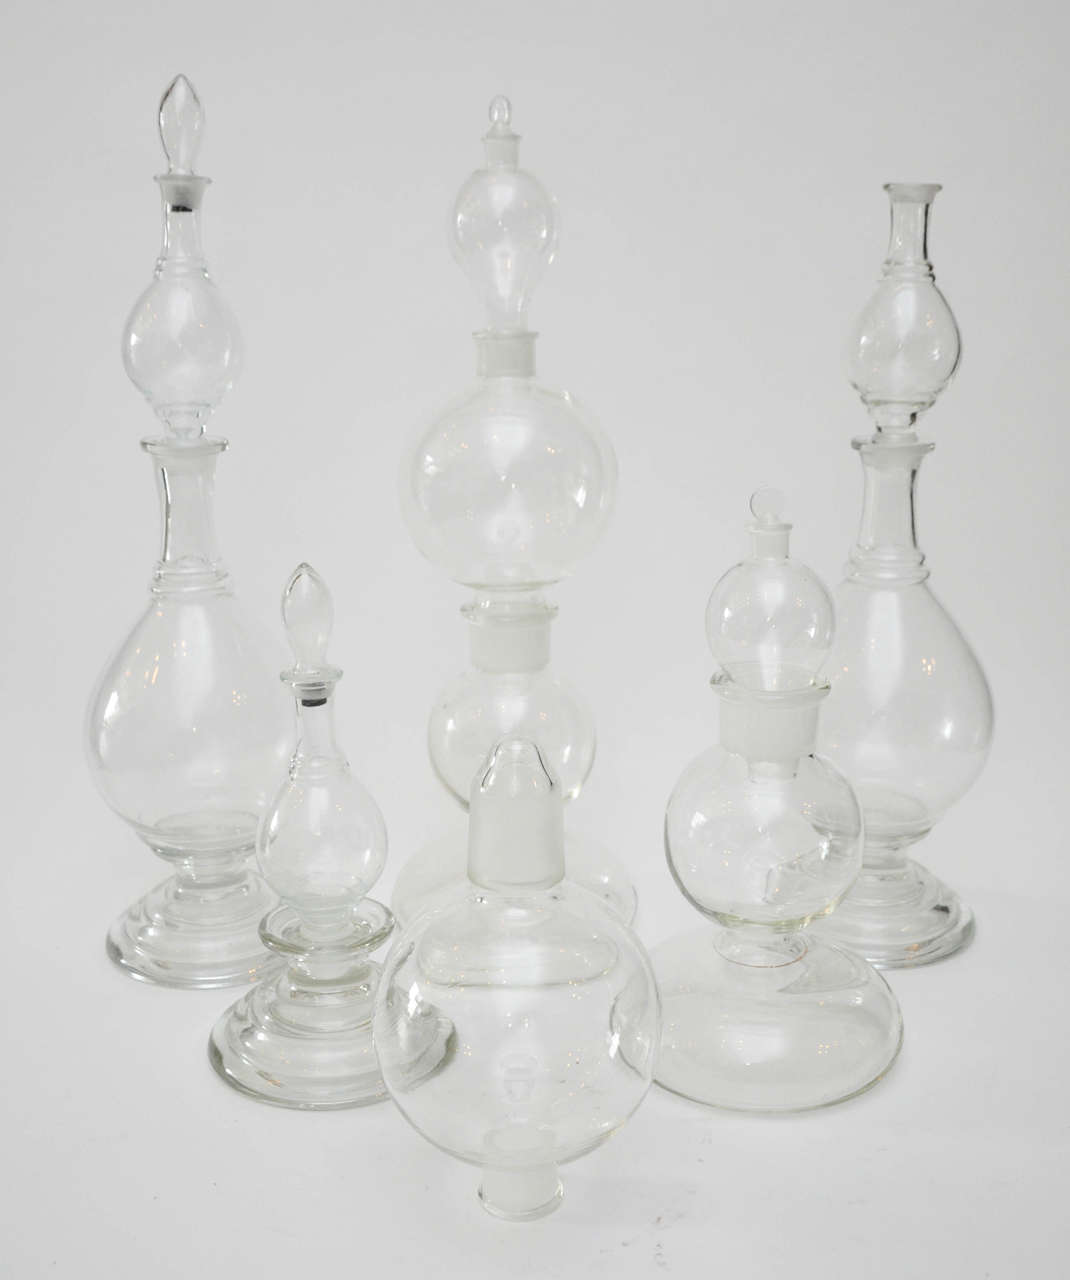 Glass vessels and tops, can be arranged in various groupings to create three to six separate vessels